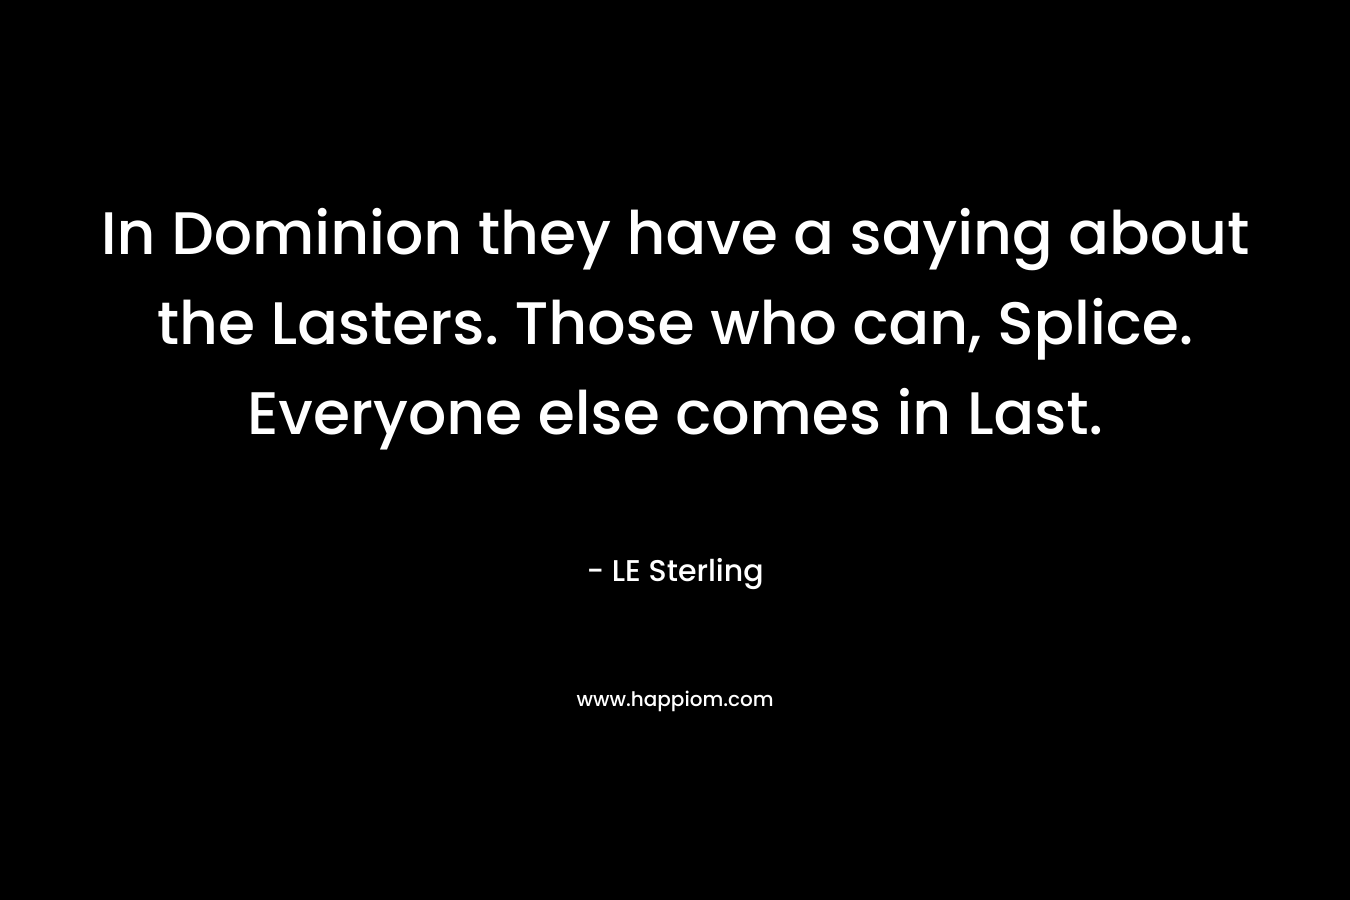 In Dominion they have a saying about the Lasters. Those who can, Splice. Everyone else comes in Last. – LE Sterling